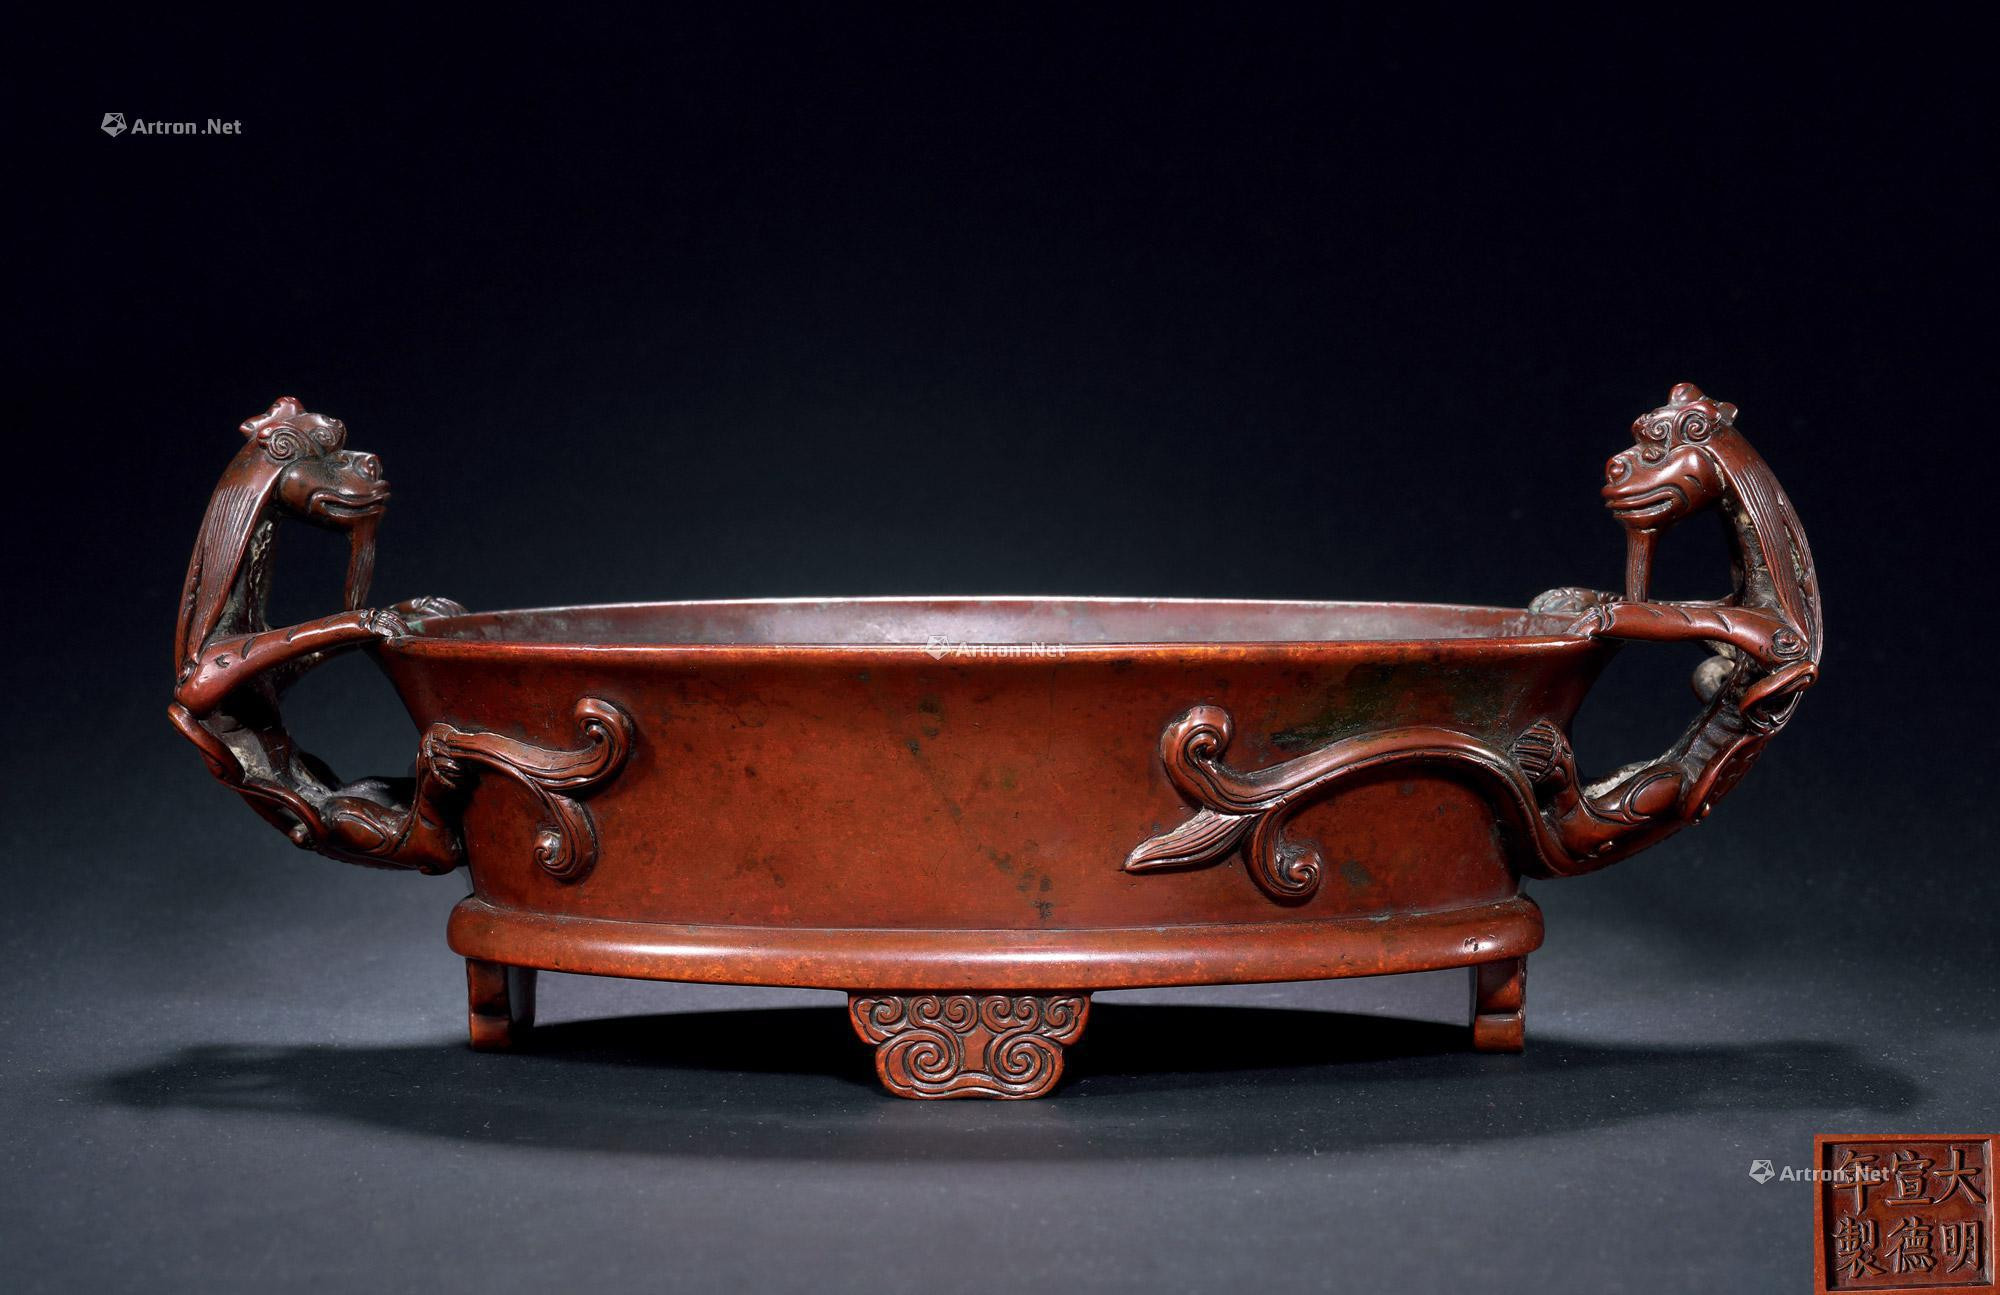 A BRONZE NARCISSUC-BOWL-SHAPE CENSER WITH DOUBLE CHI-DRAGON EARS